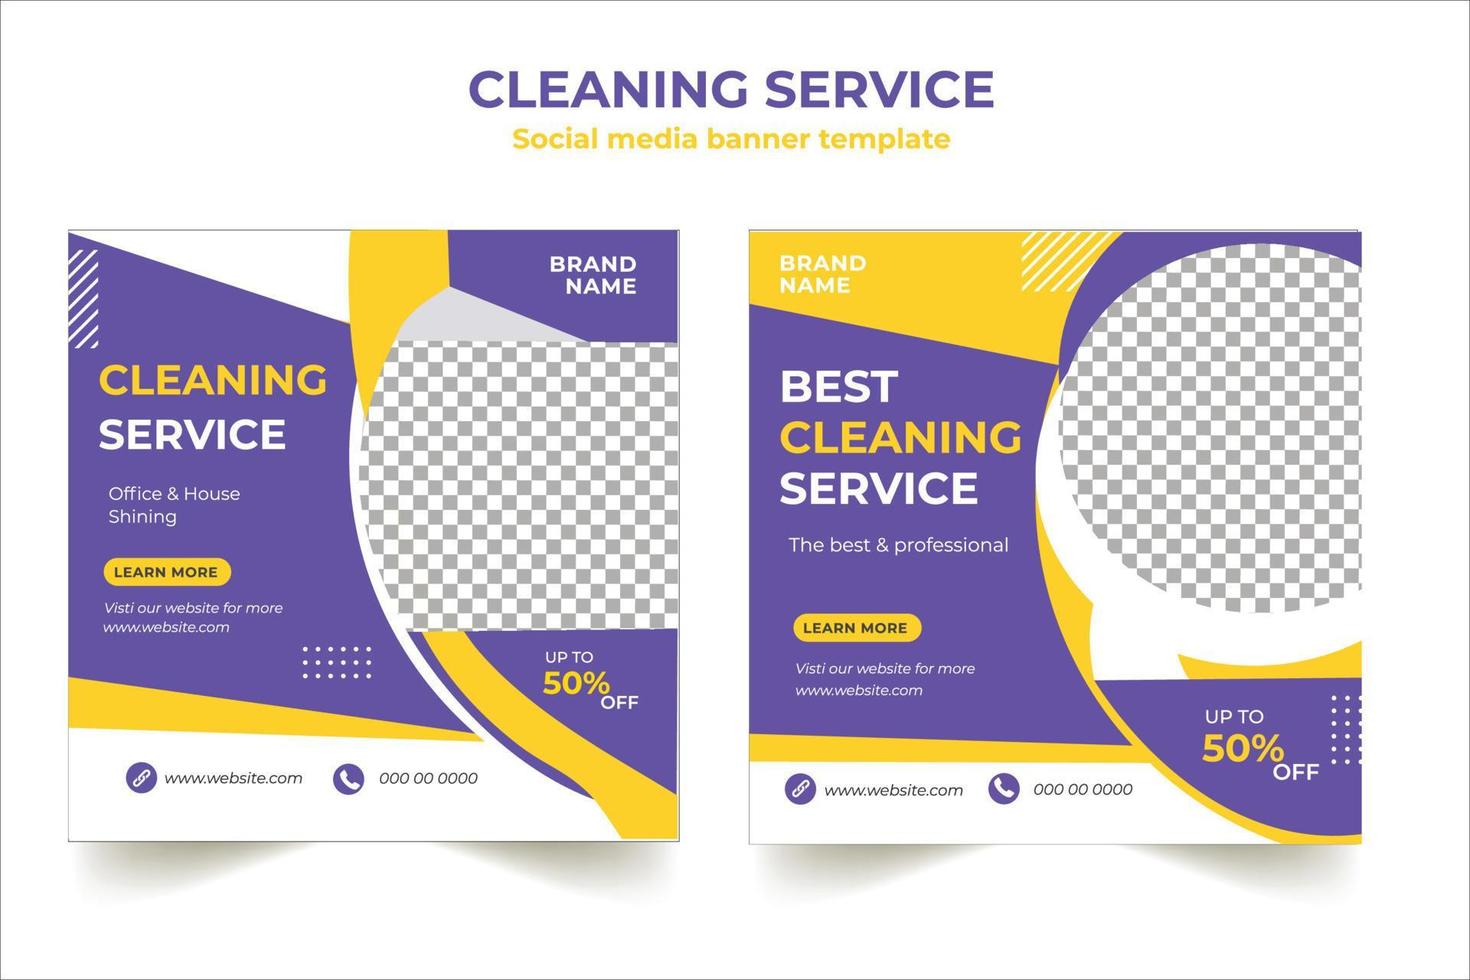 Cleaning service social media template vector